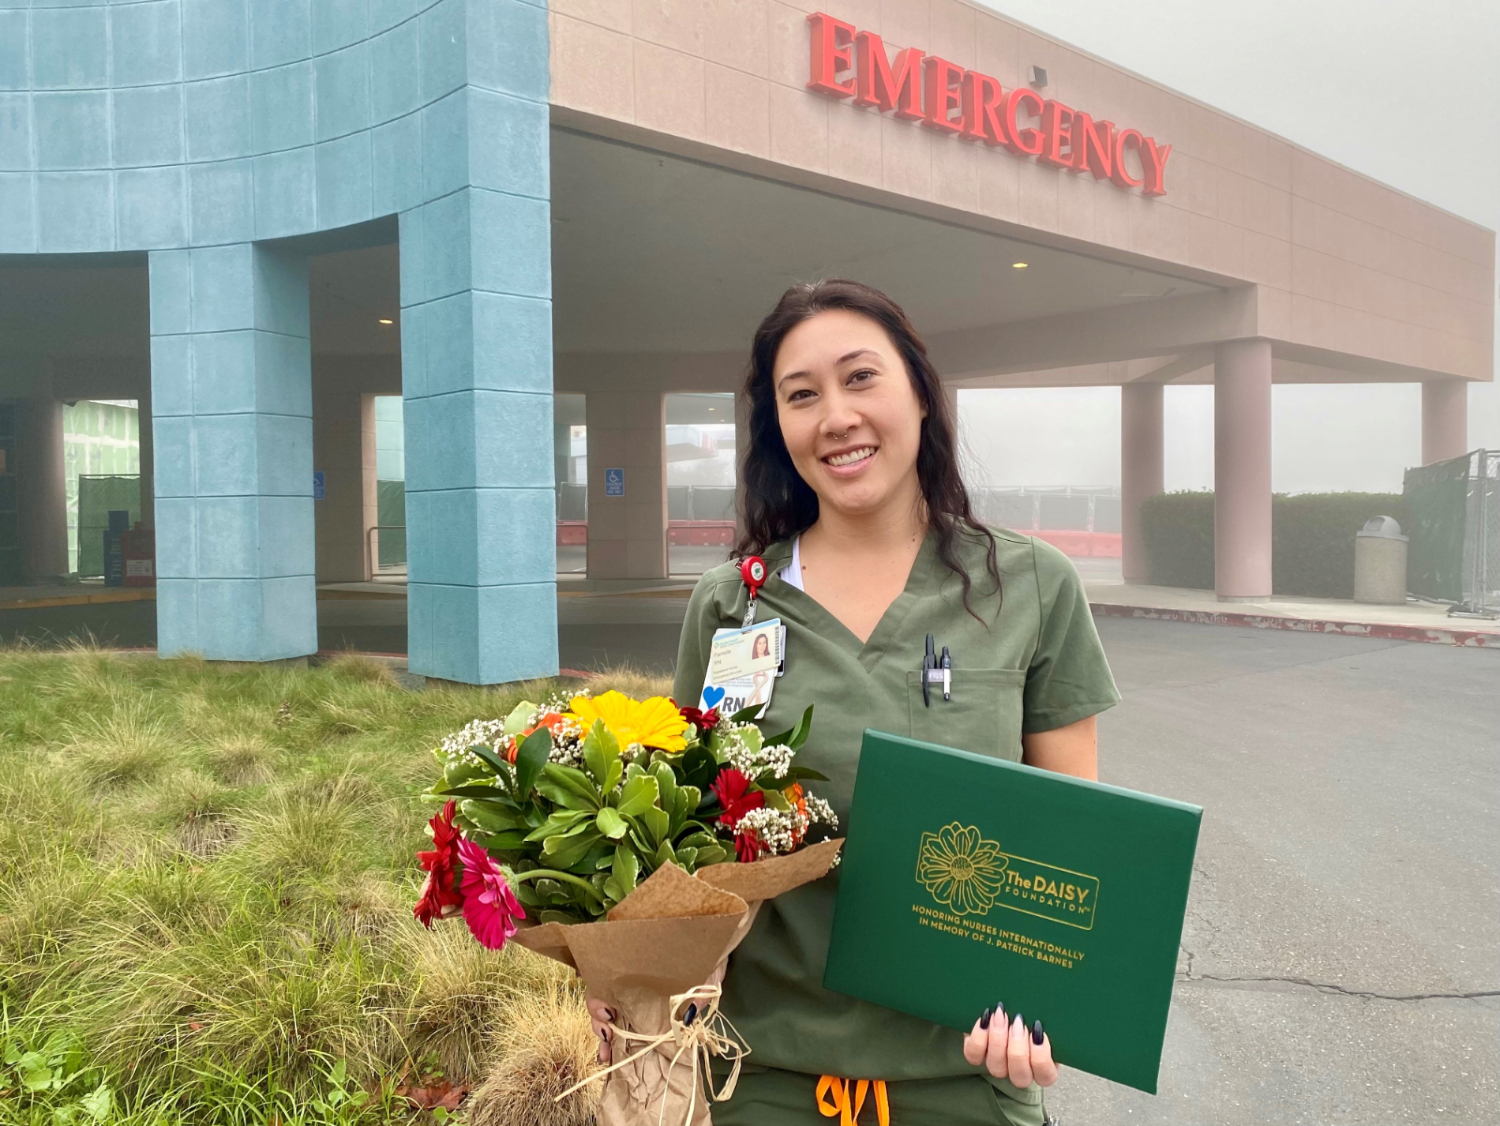 Sutter Davis Hospital emergency department nurse Pam Blankenship poses with flowers and her DAISY Award outside the hospital.